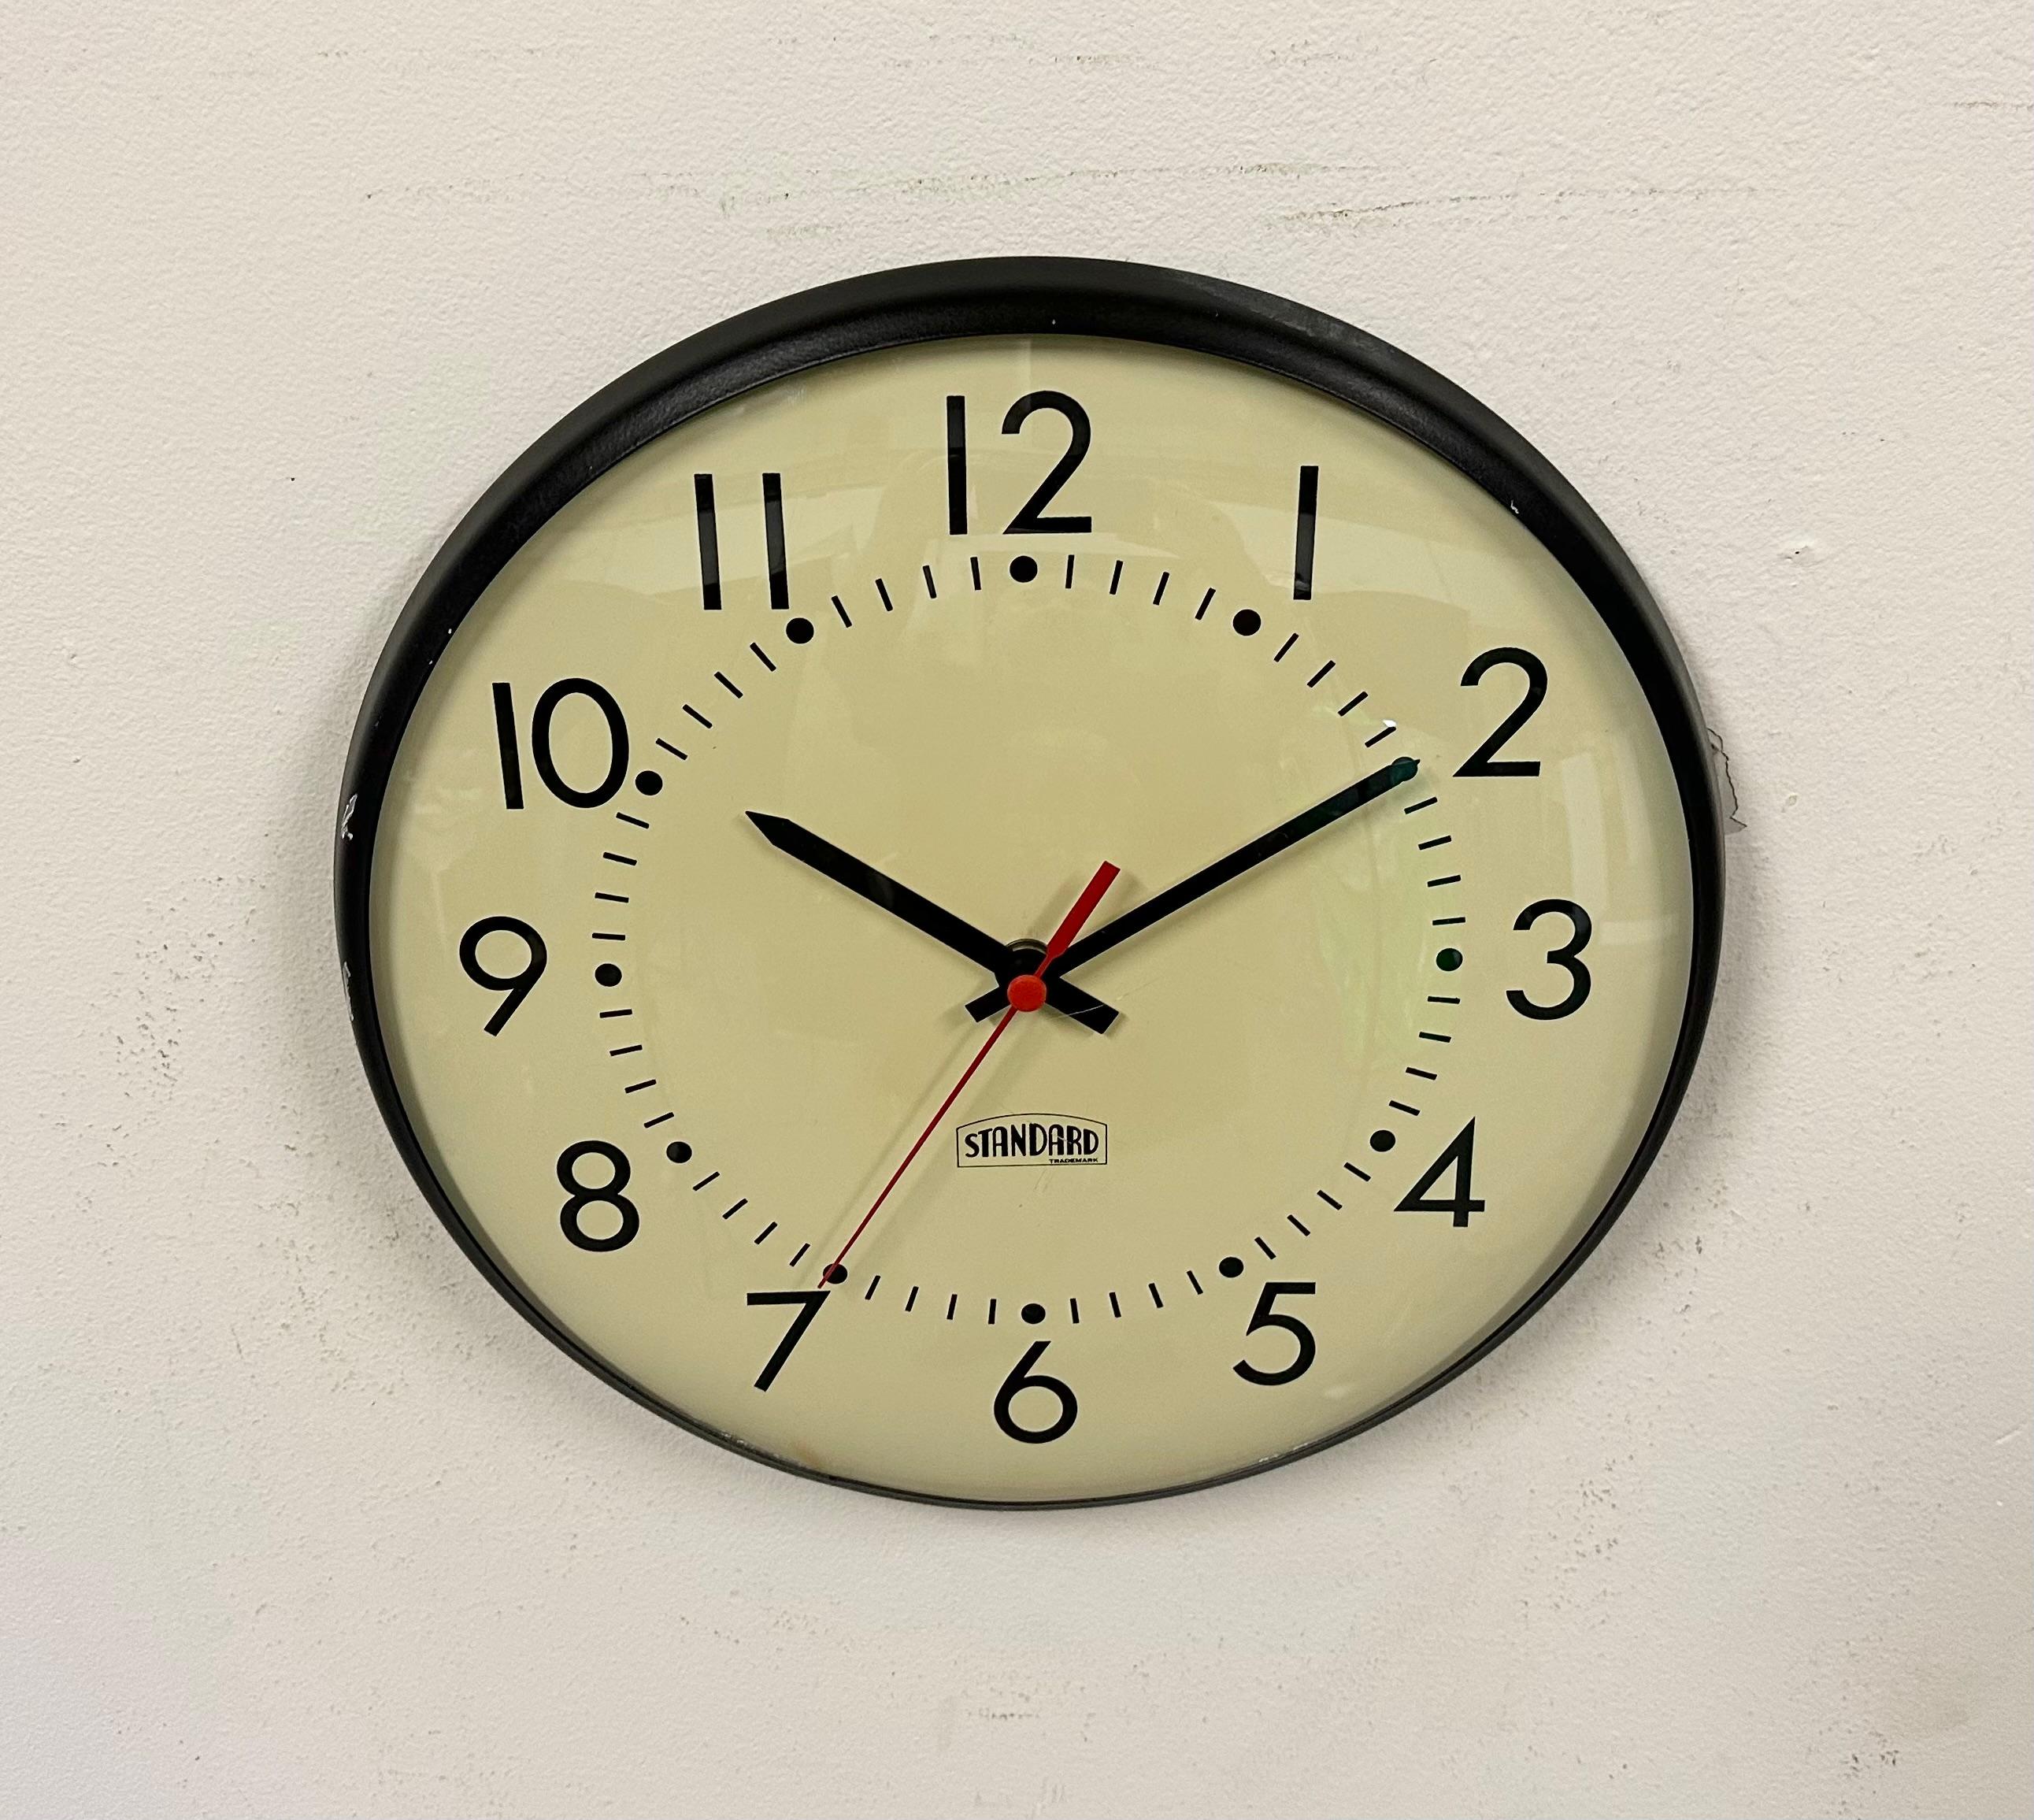 Industrial Vintage School Wall Clock from Standard Electric, 1970s